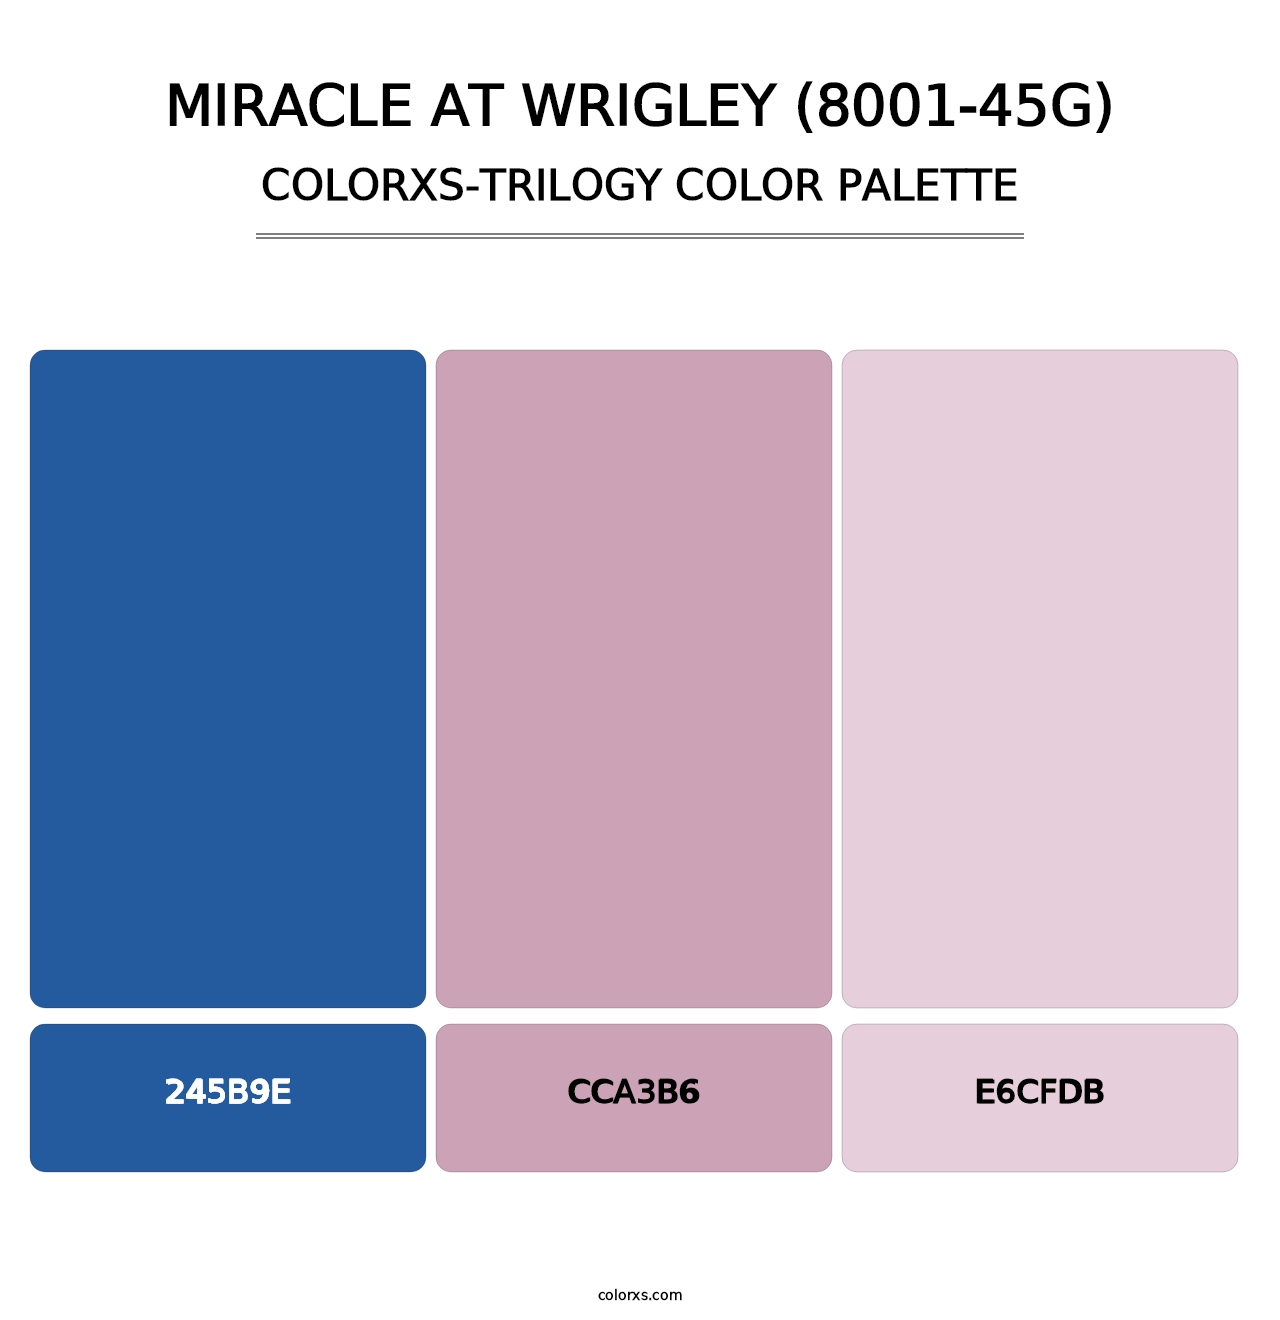 Miracle at Wrigley (8001-45G) - Colorxs Trilogy Palette